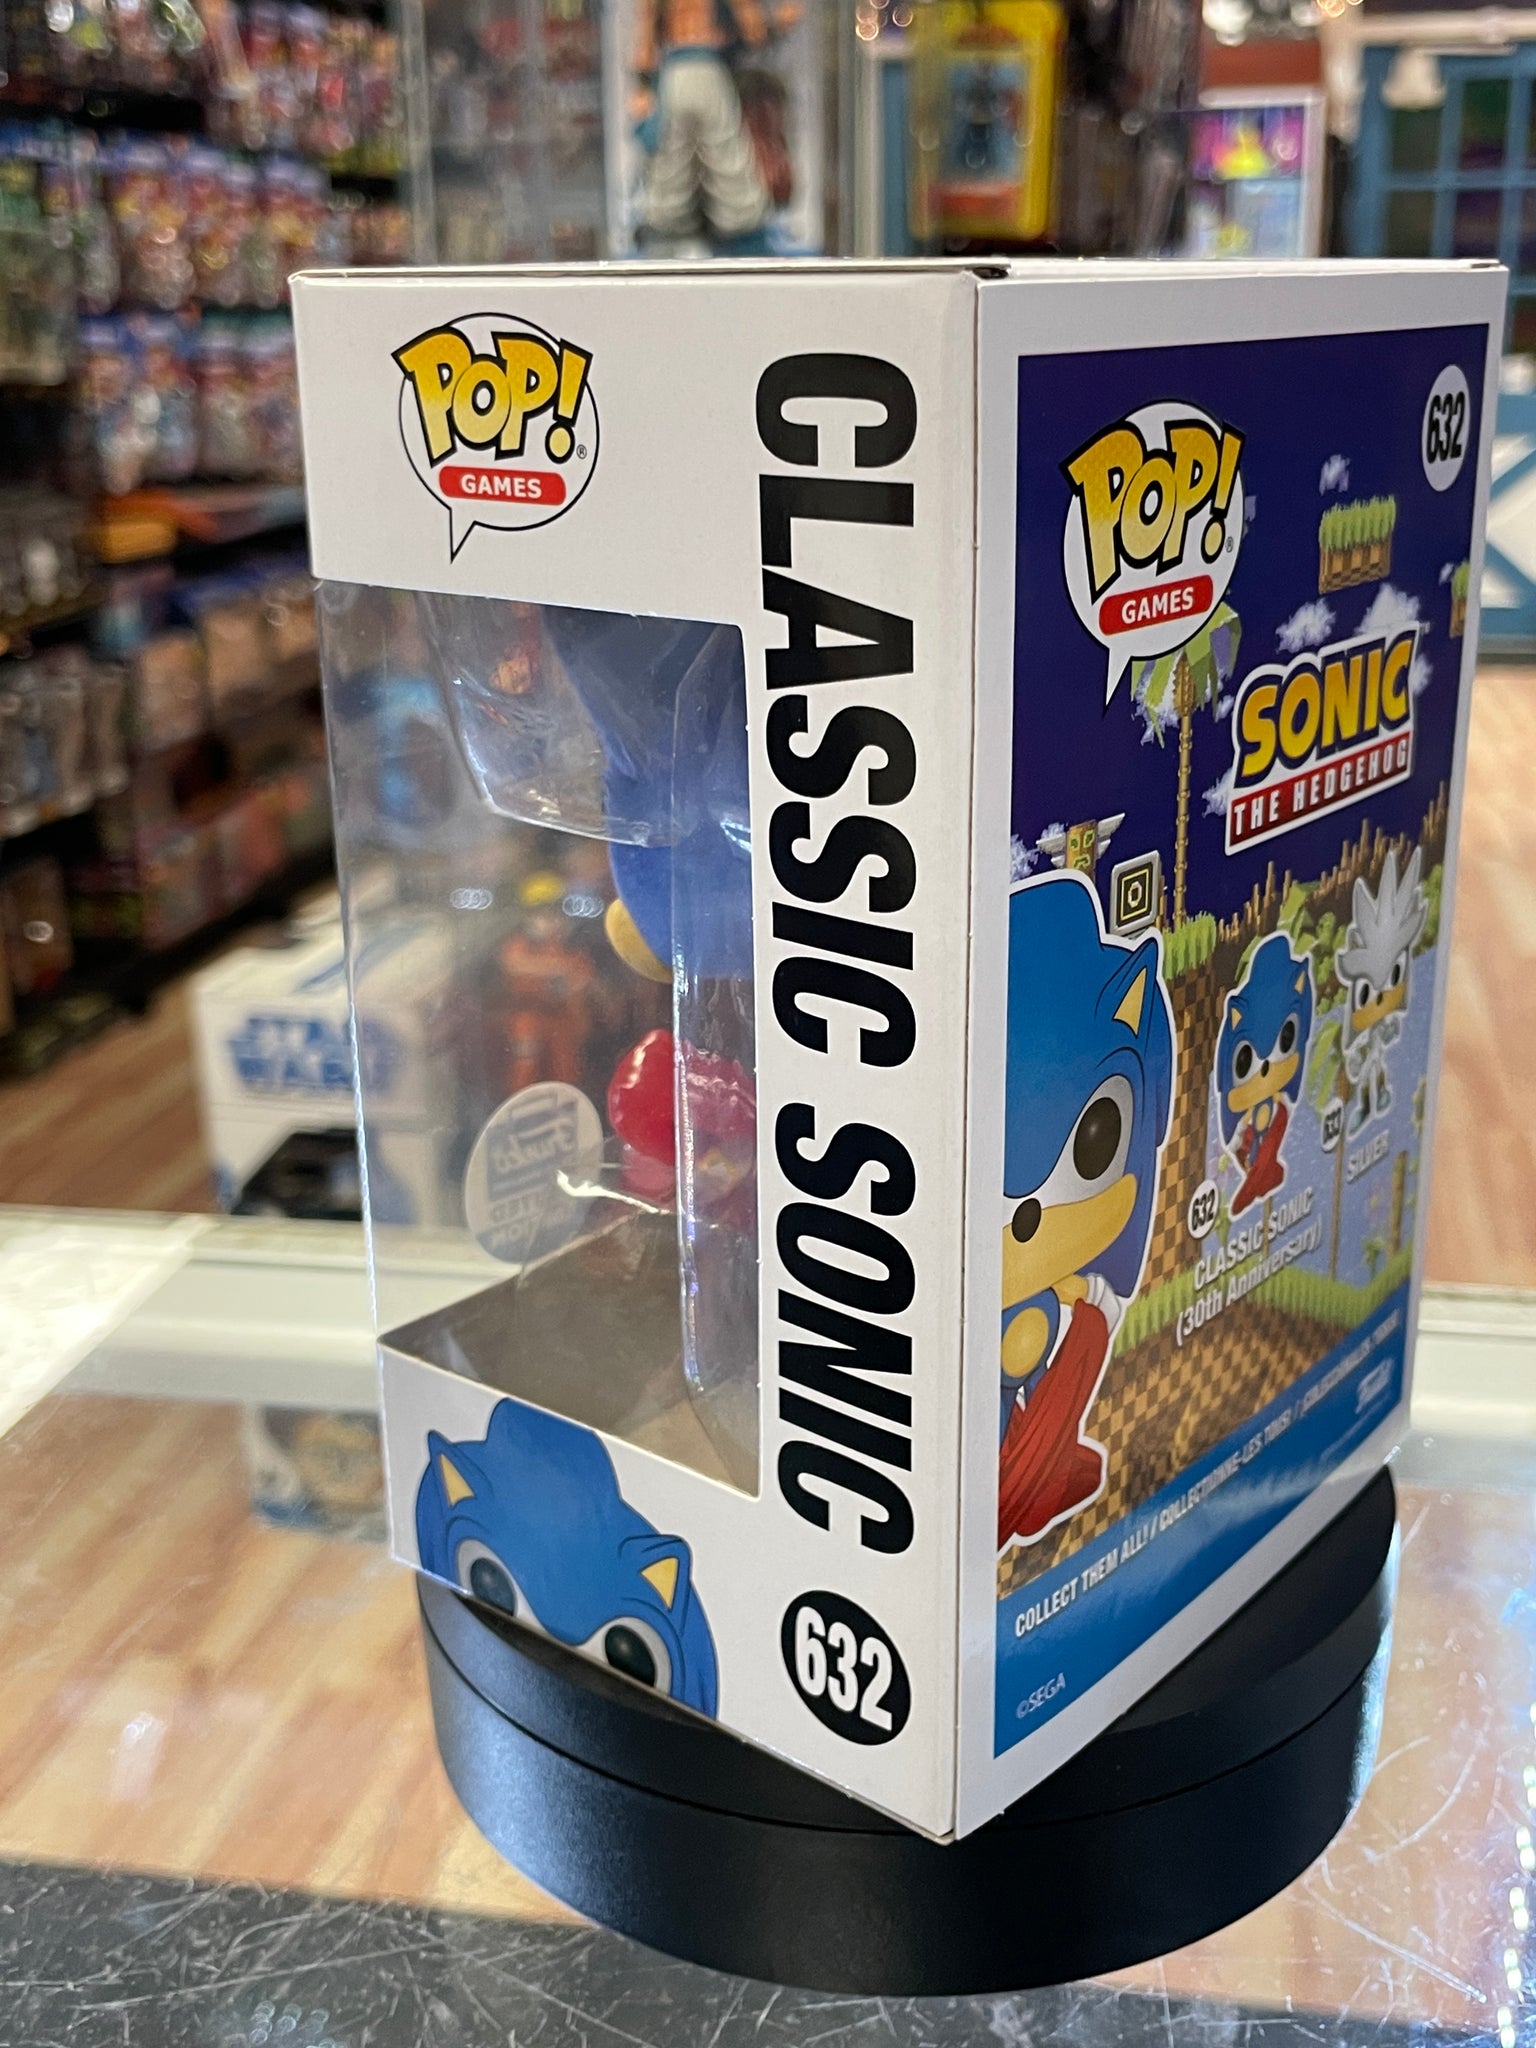 Classic Sonic (Flocked, Sonic the Hedgehog) 632 - Funko Shop Exclusive